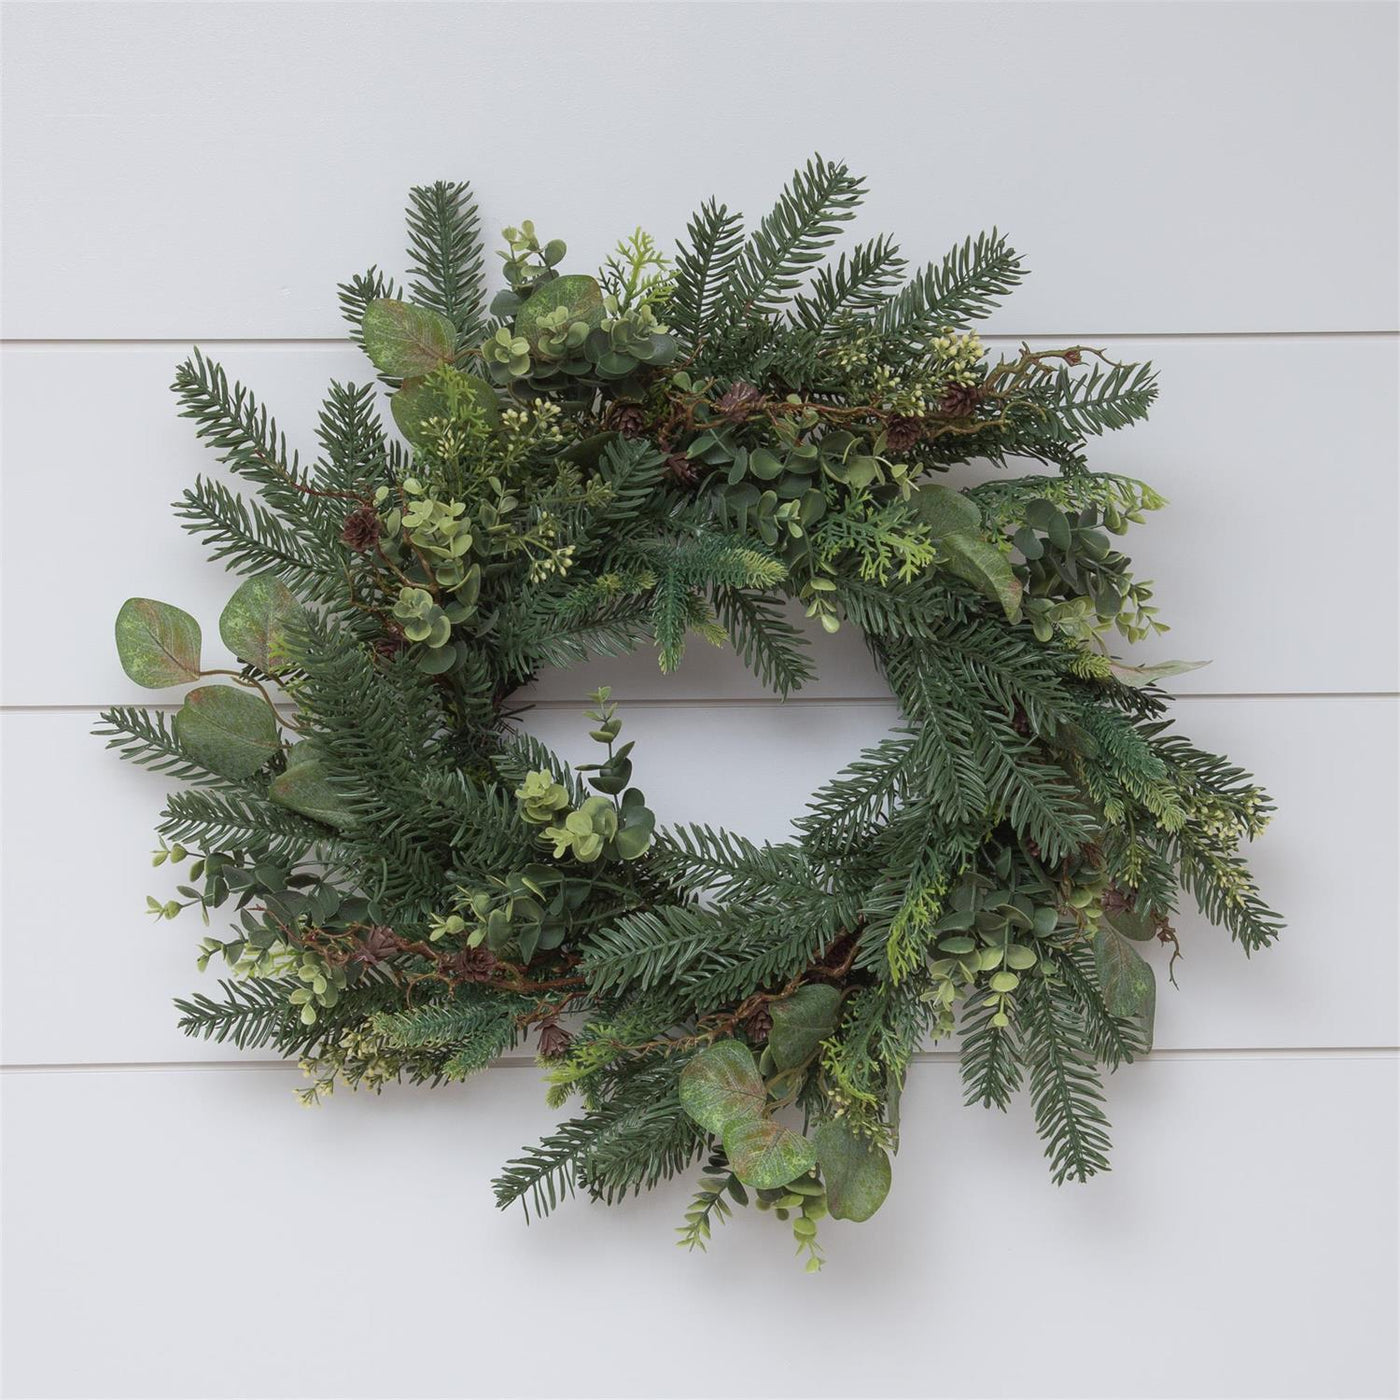 Natural Style Mixed Winter Greens 24" Faux Evergreen Wreath